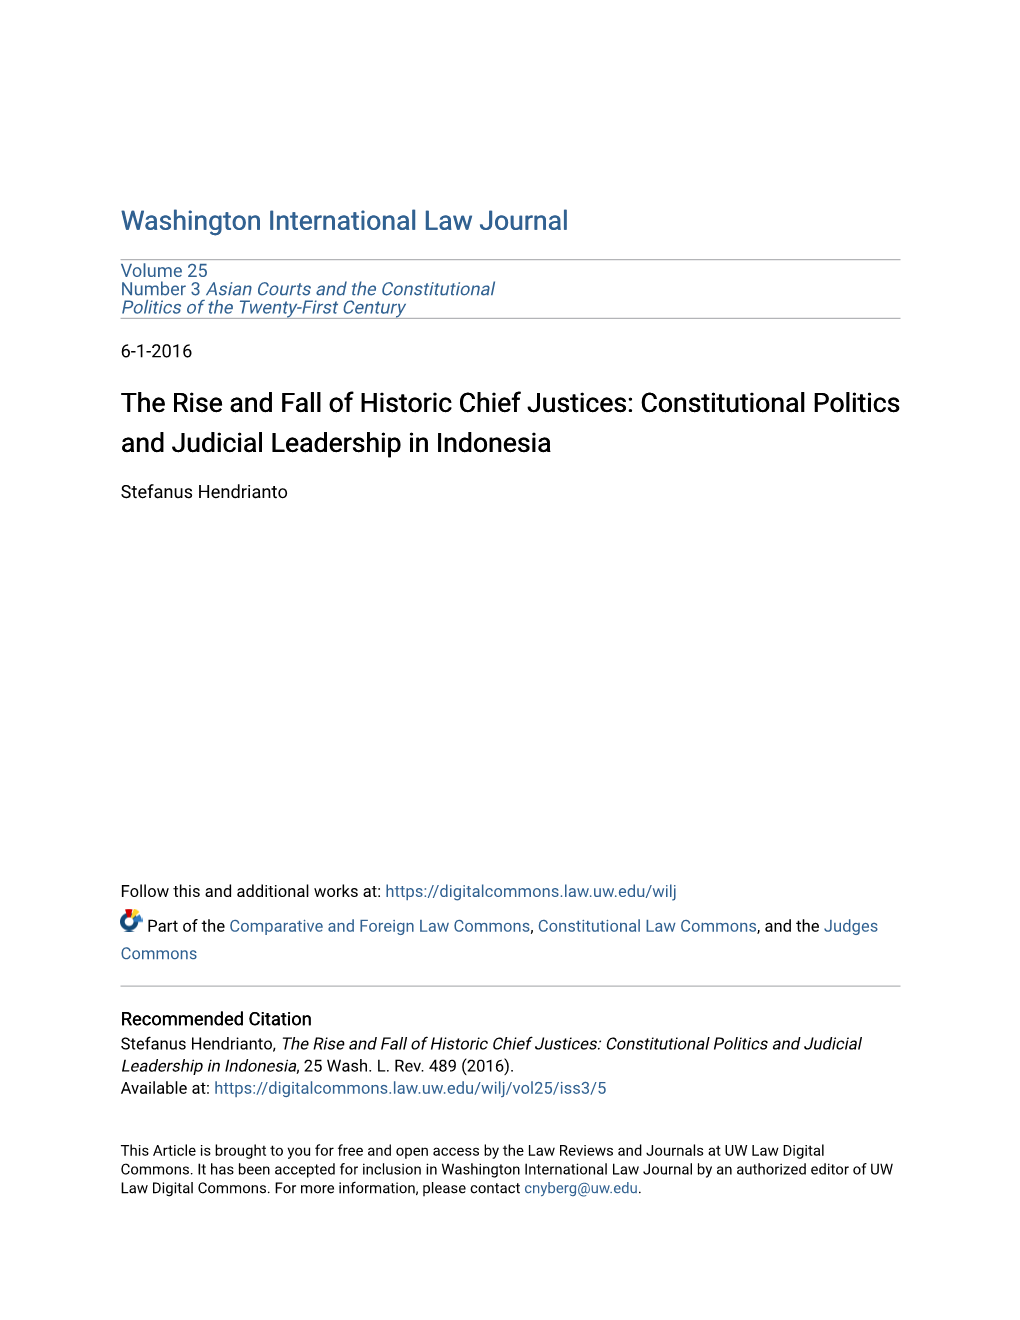 The Rise and Fall of Historic Chief Justices: Constitutional Politics and Judicial Leadership in Indonesia